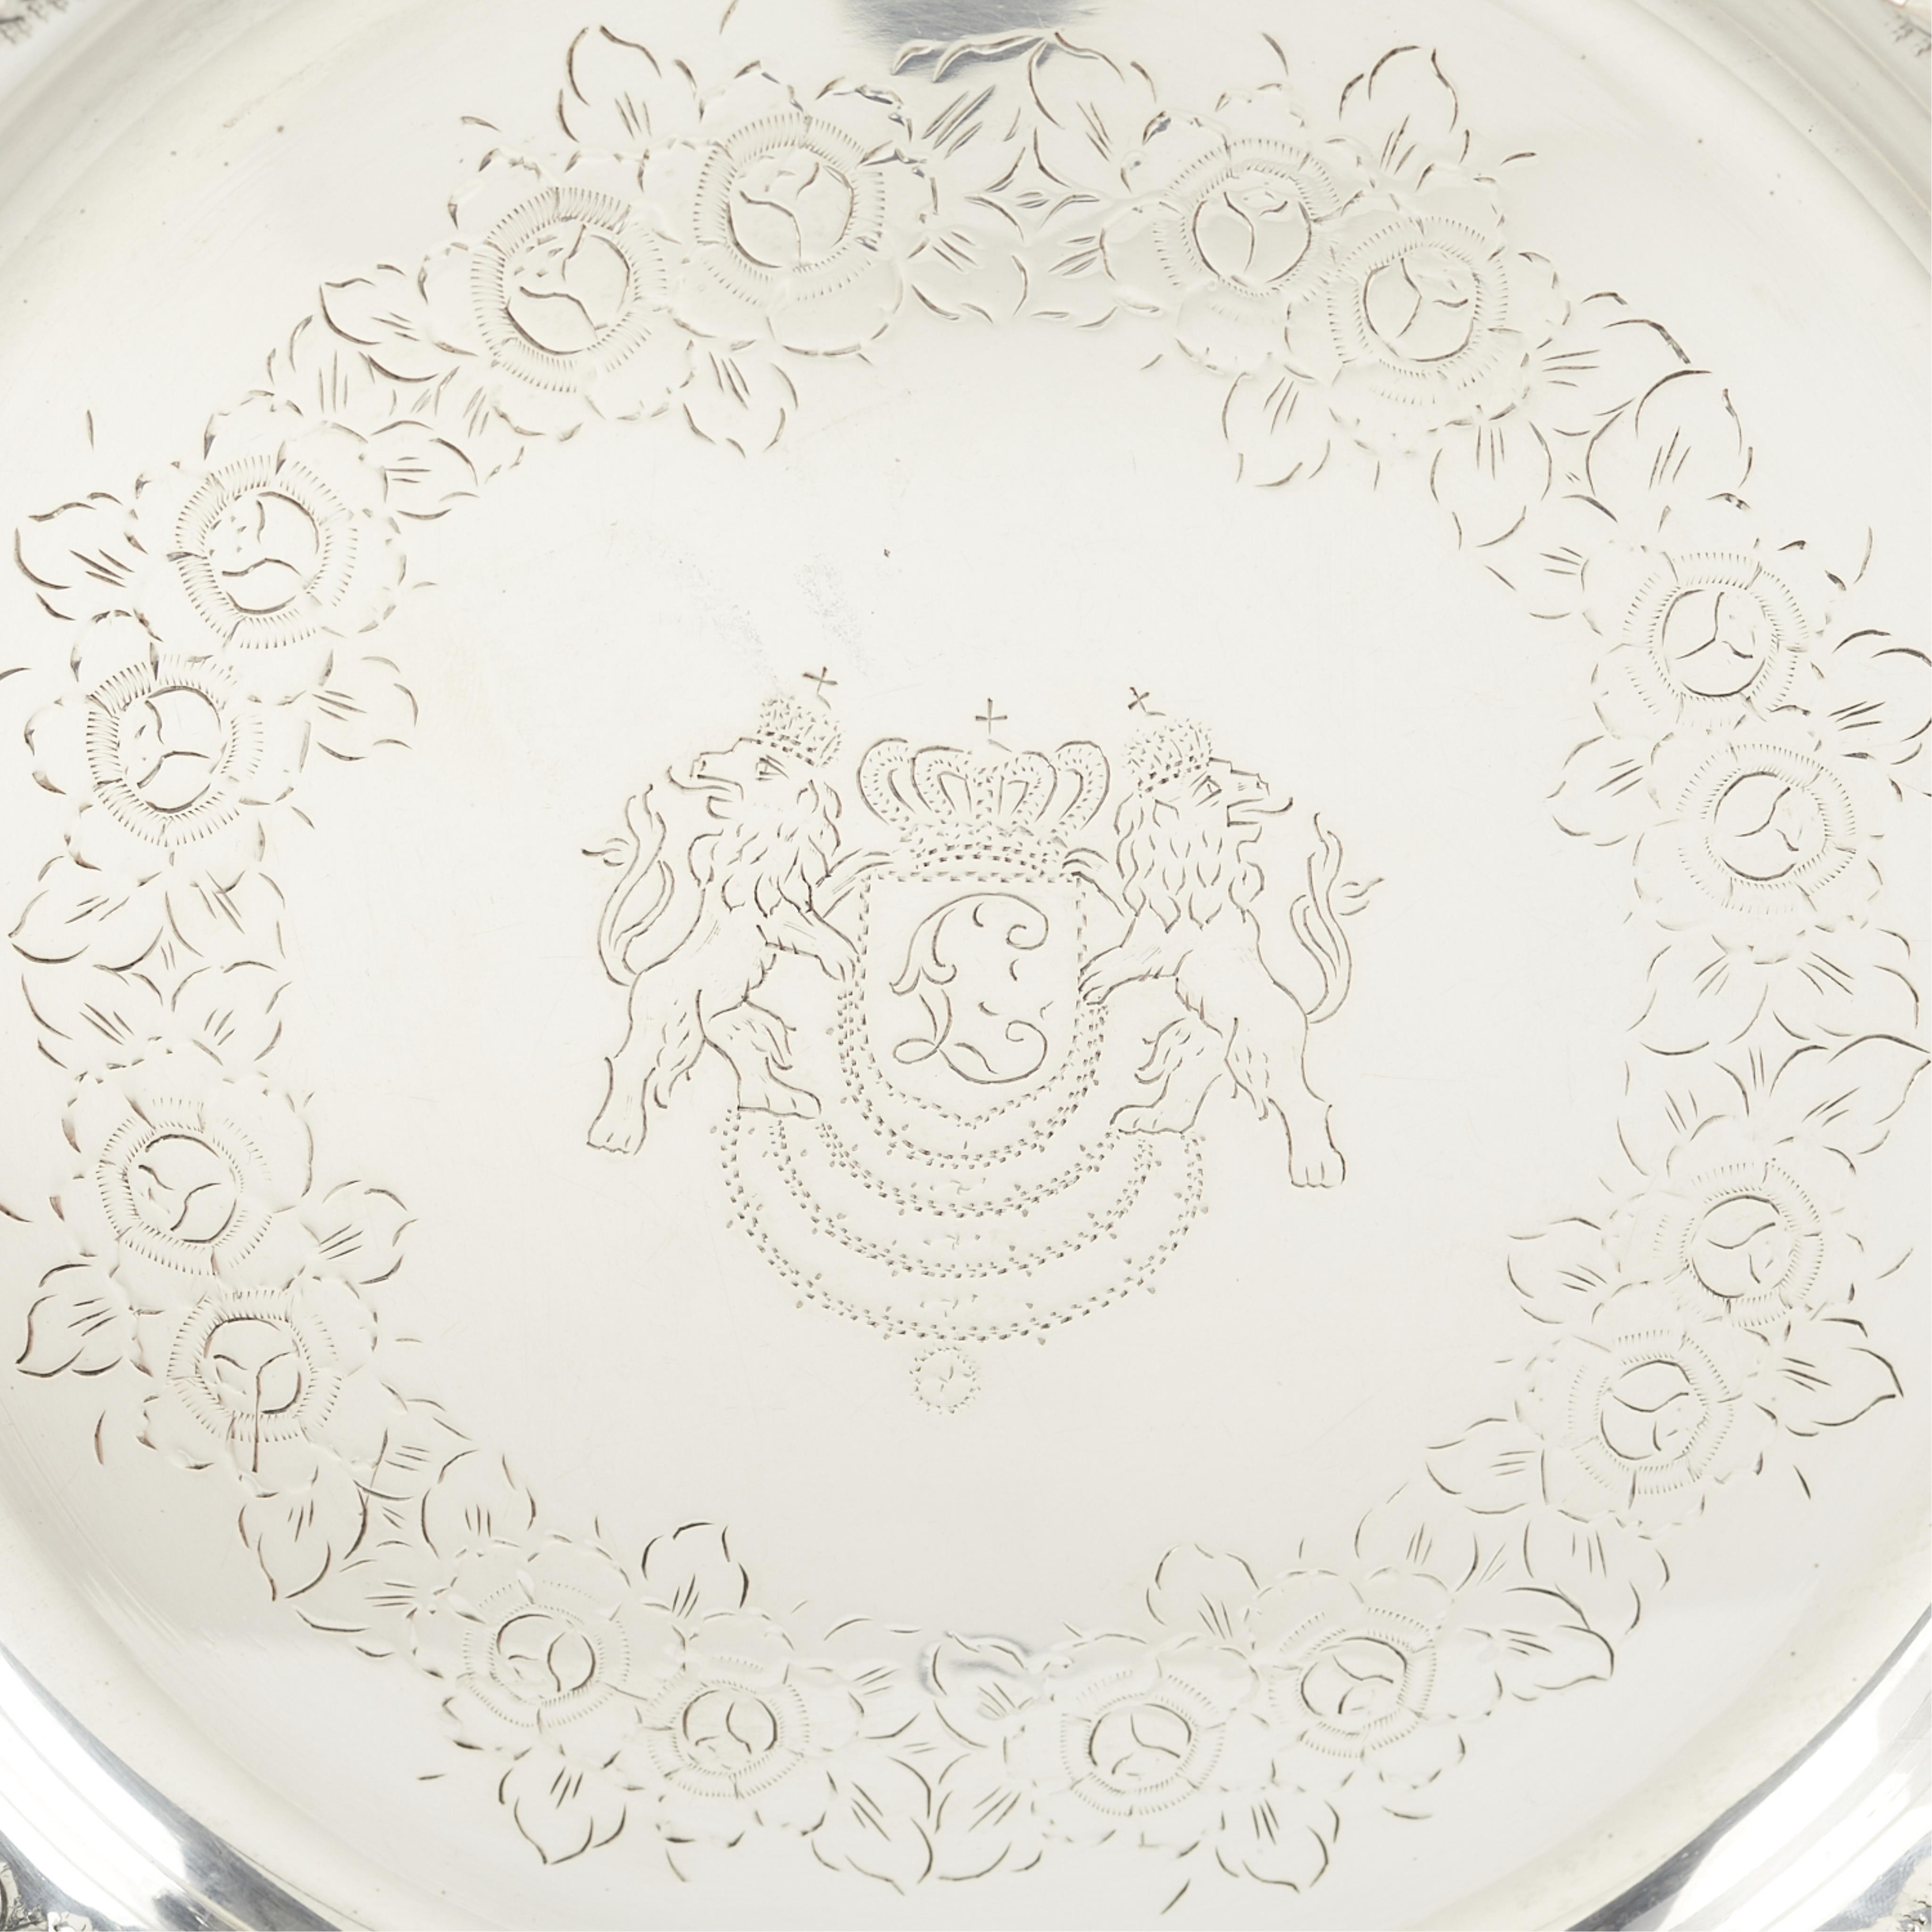 800 Silver Plate with Repousse Roses - Image 5 of 6